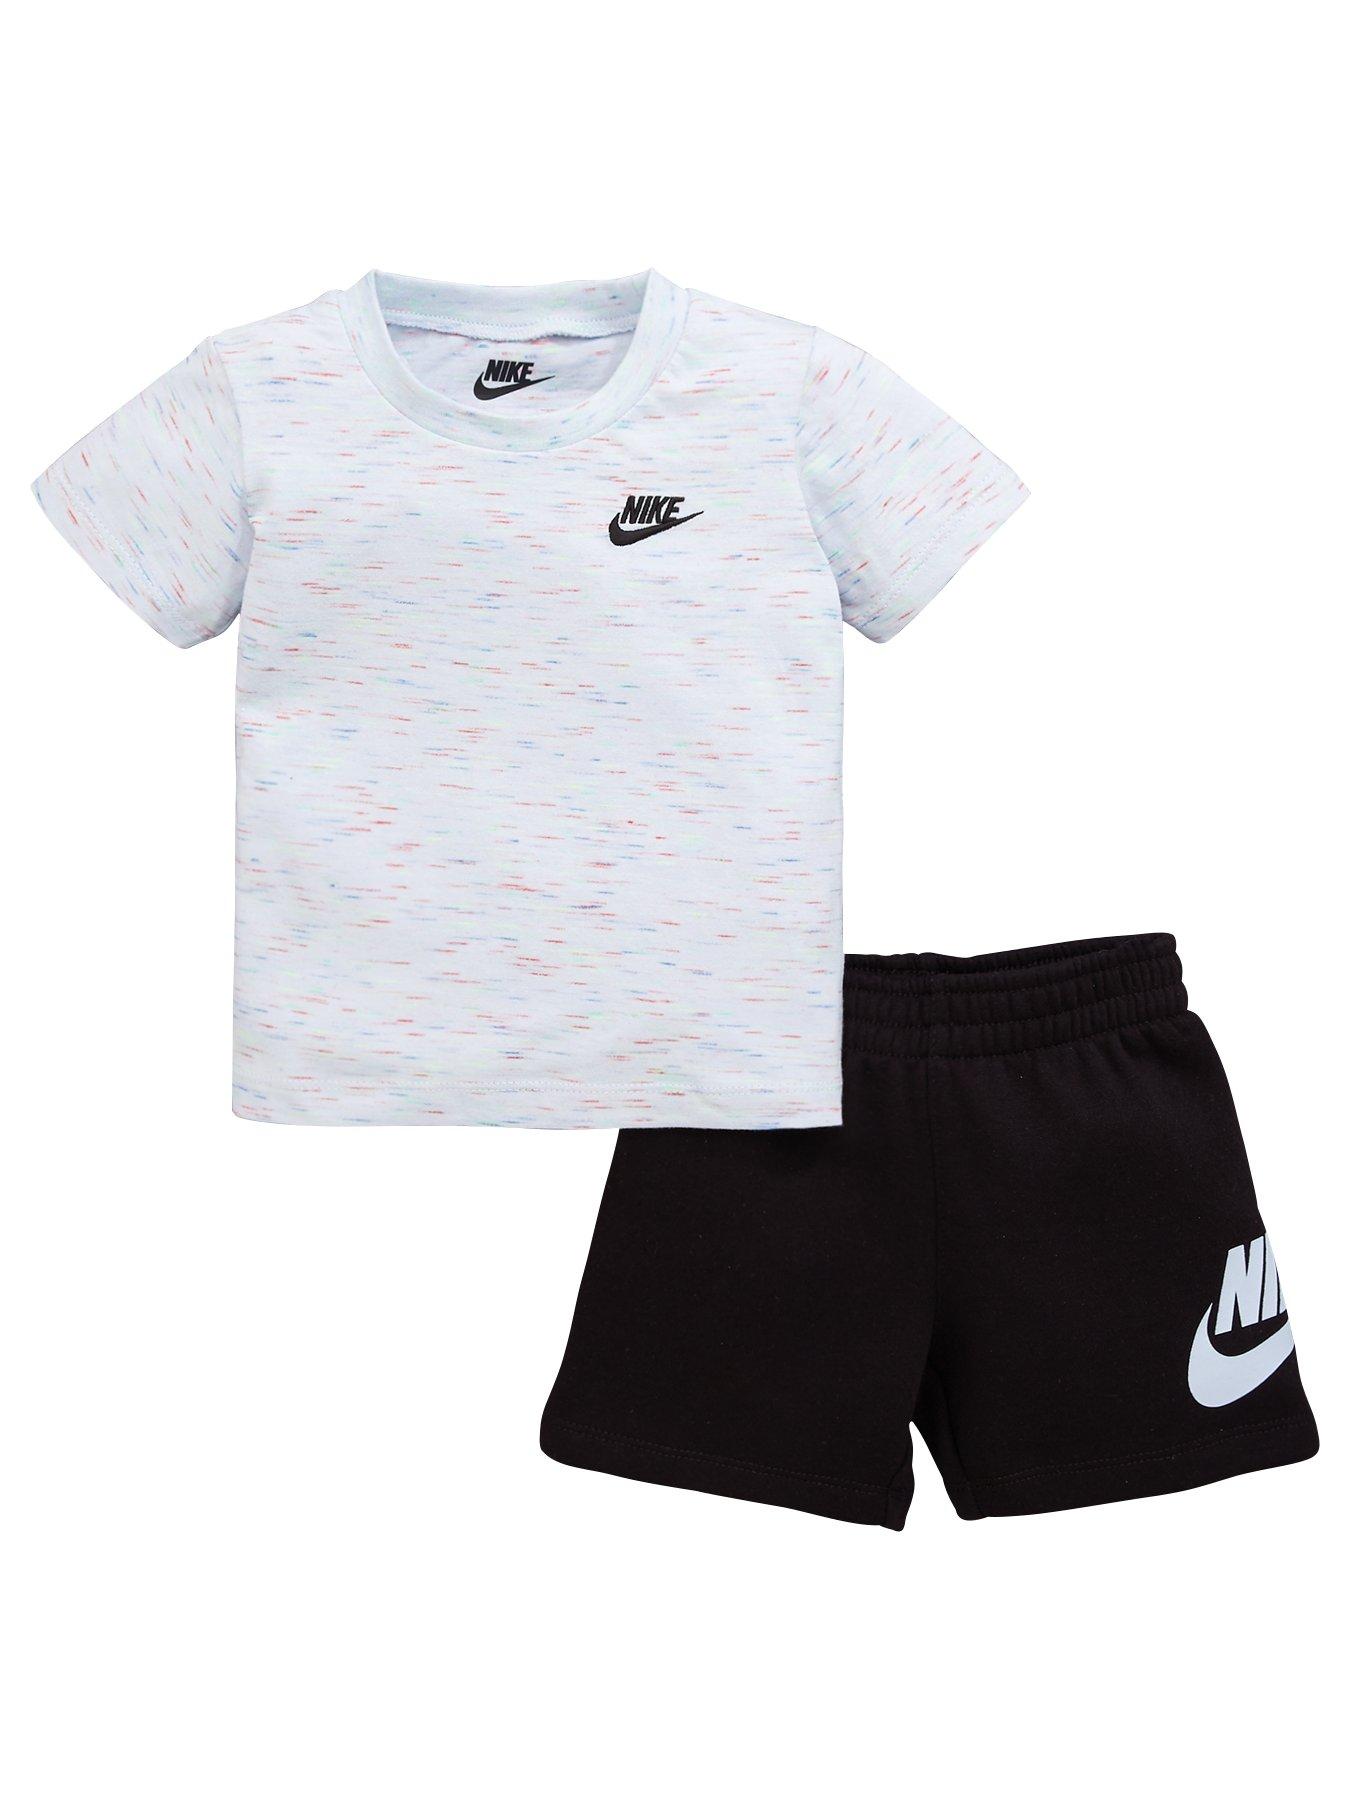 baby nike clothes on sale